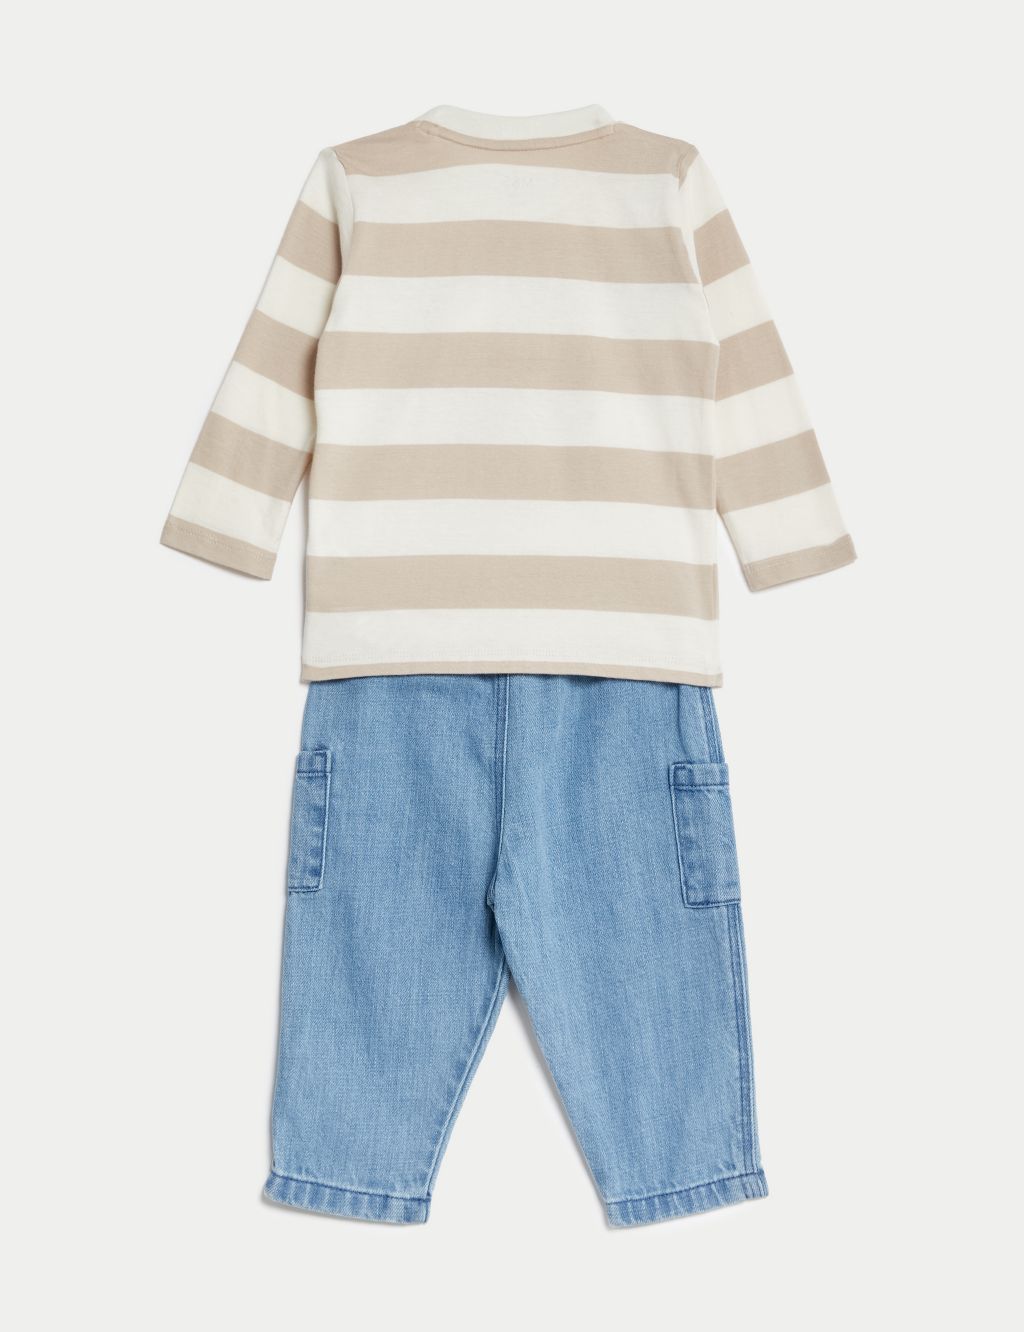 2pc Cotton Rich Striped Outfit (0-3 Yrs) image 2